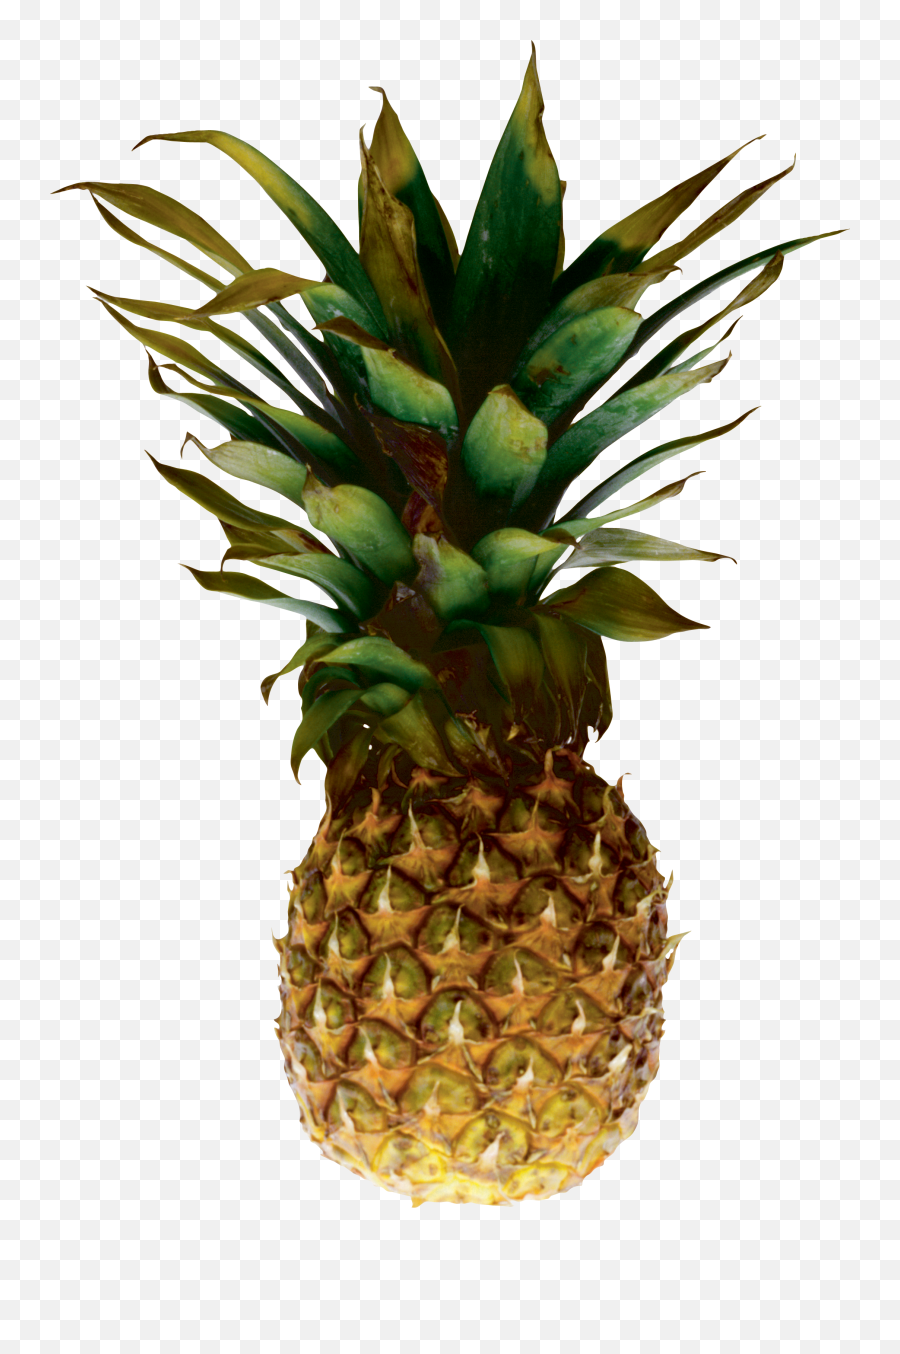 Pineapple Png Image - Pineapple With Transparent Background Emoji,Pineapple Png